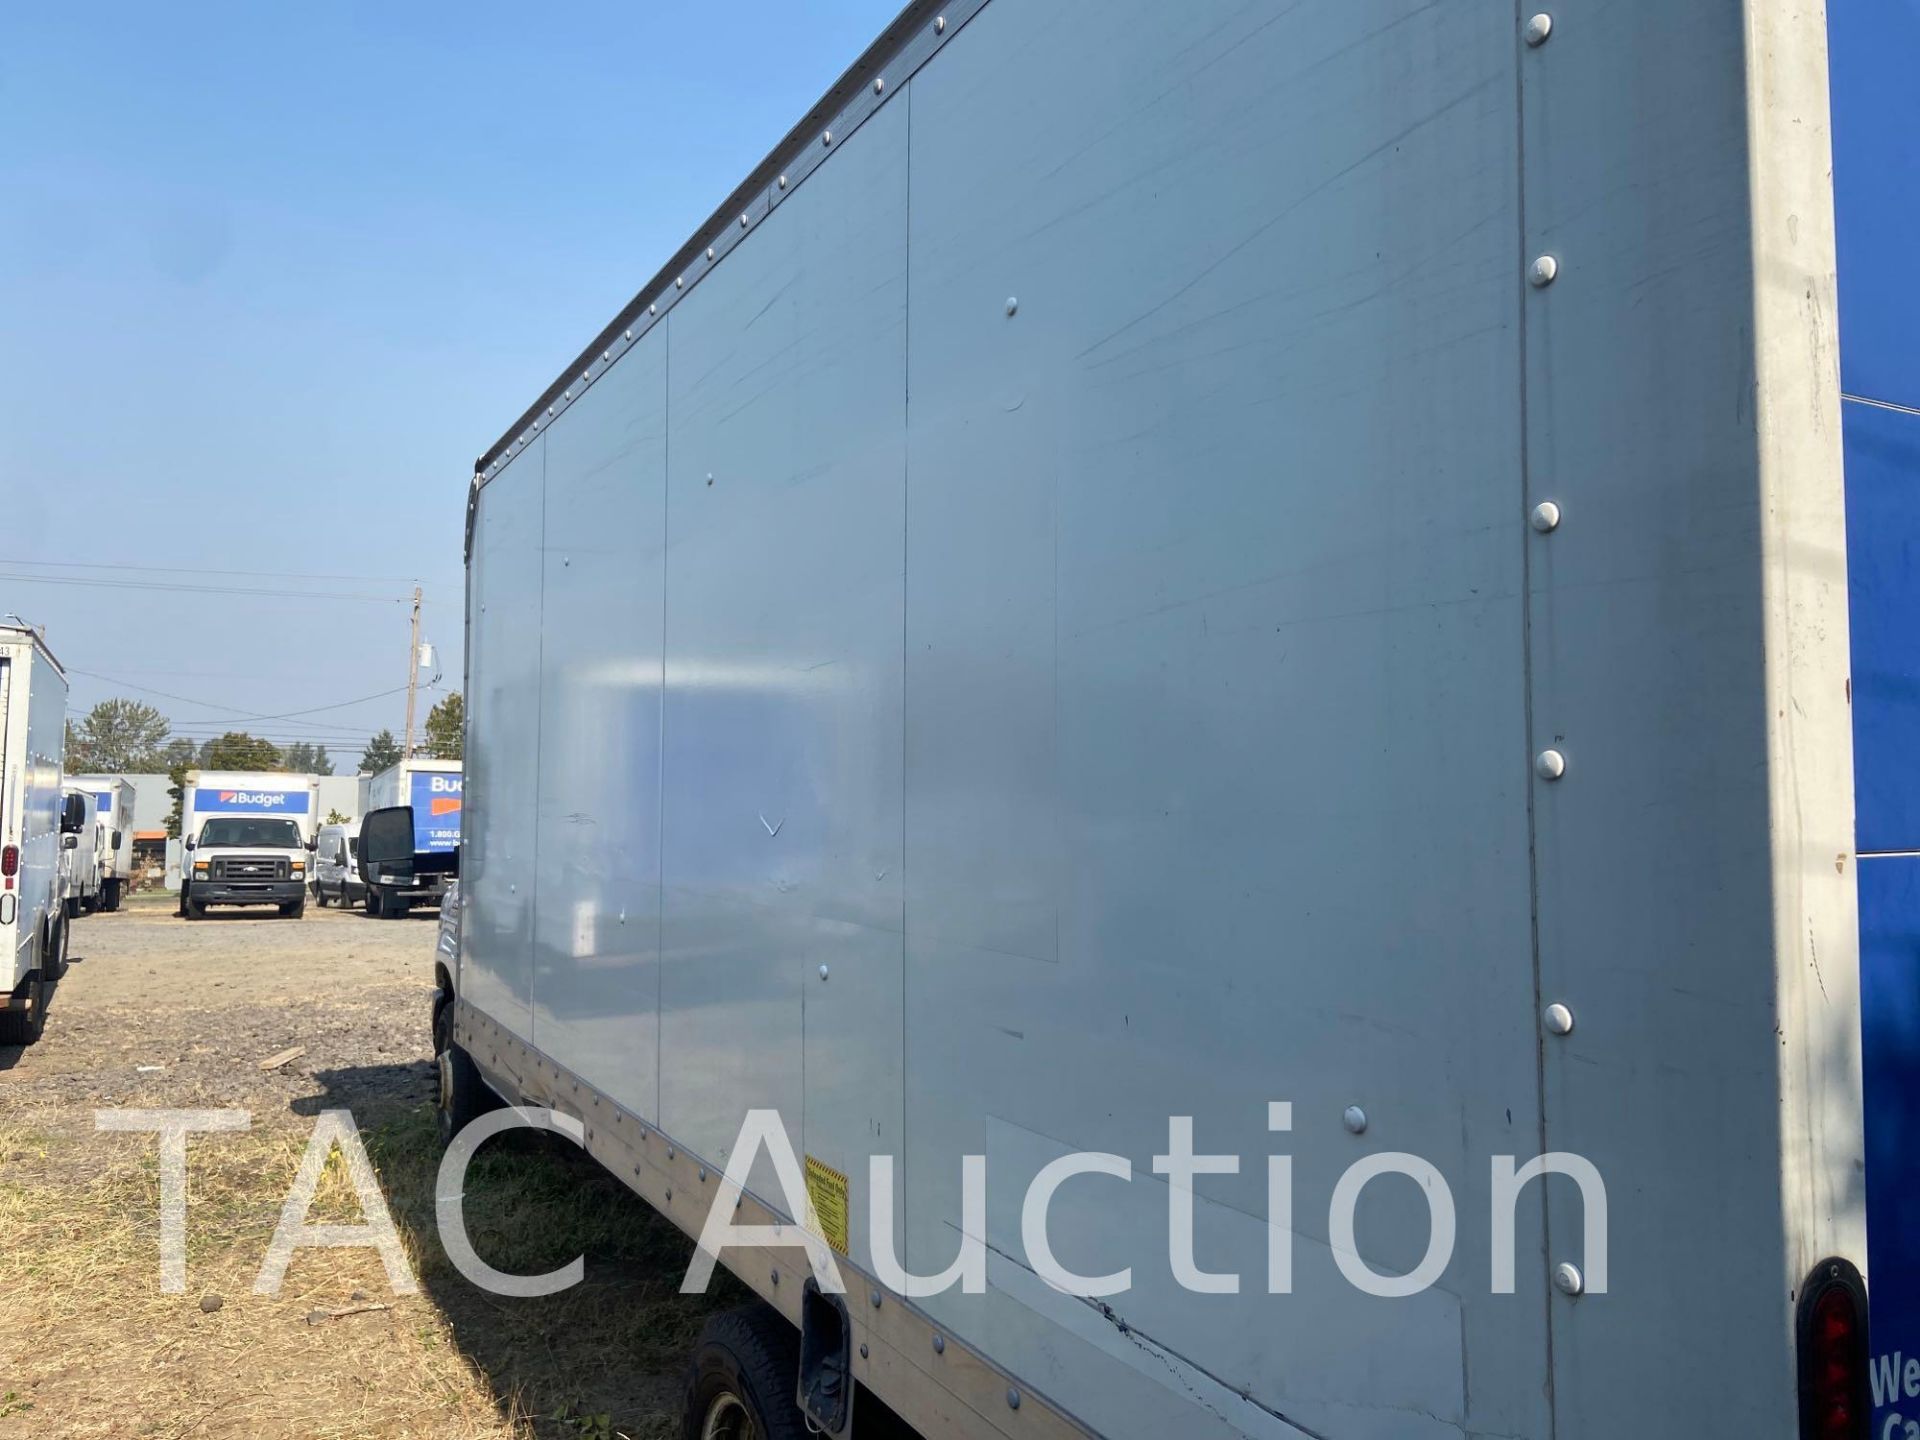 2015 Ford E-350 16ft Box Truck - Image 19 of 106